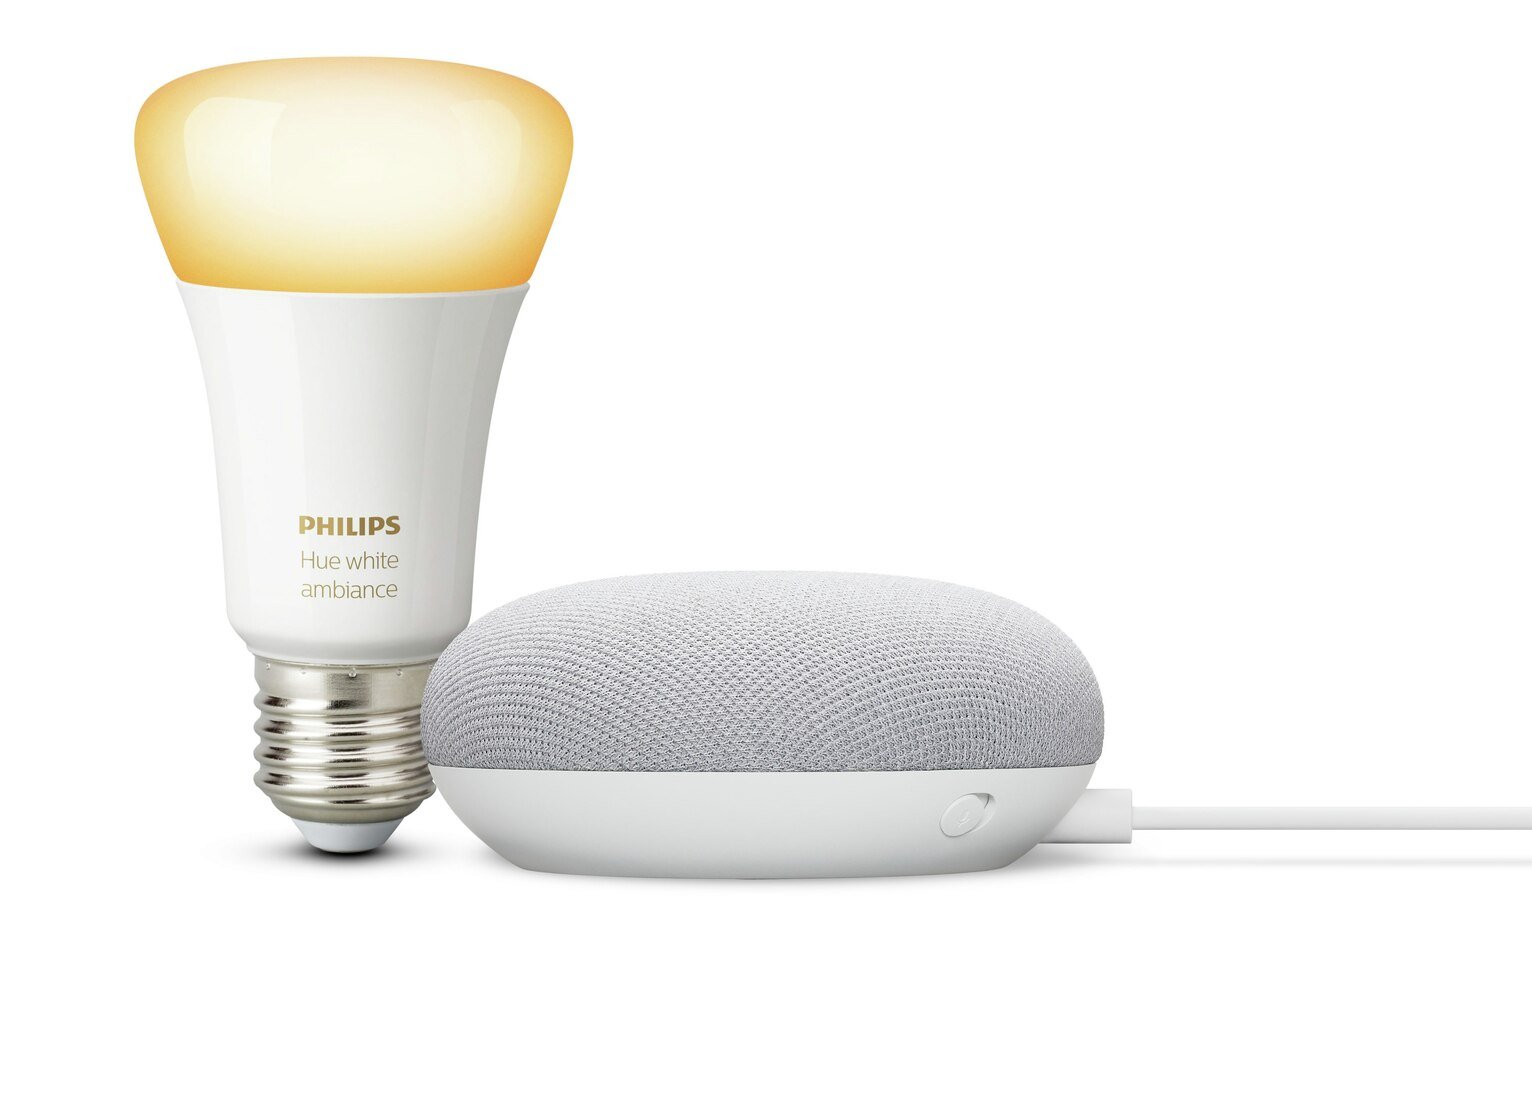 Google Nest Mini with Philips Hue B22 White Bulb Review